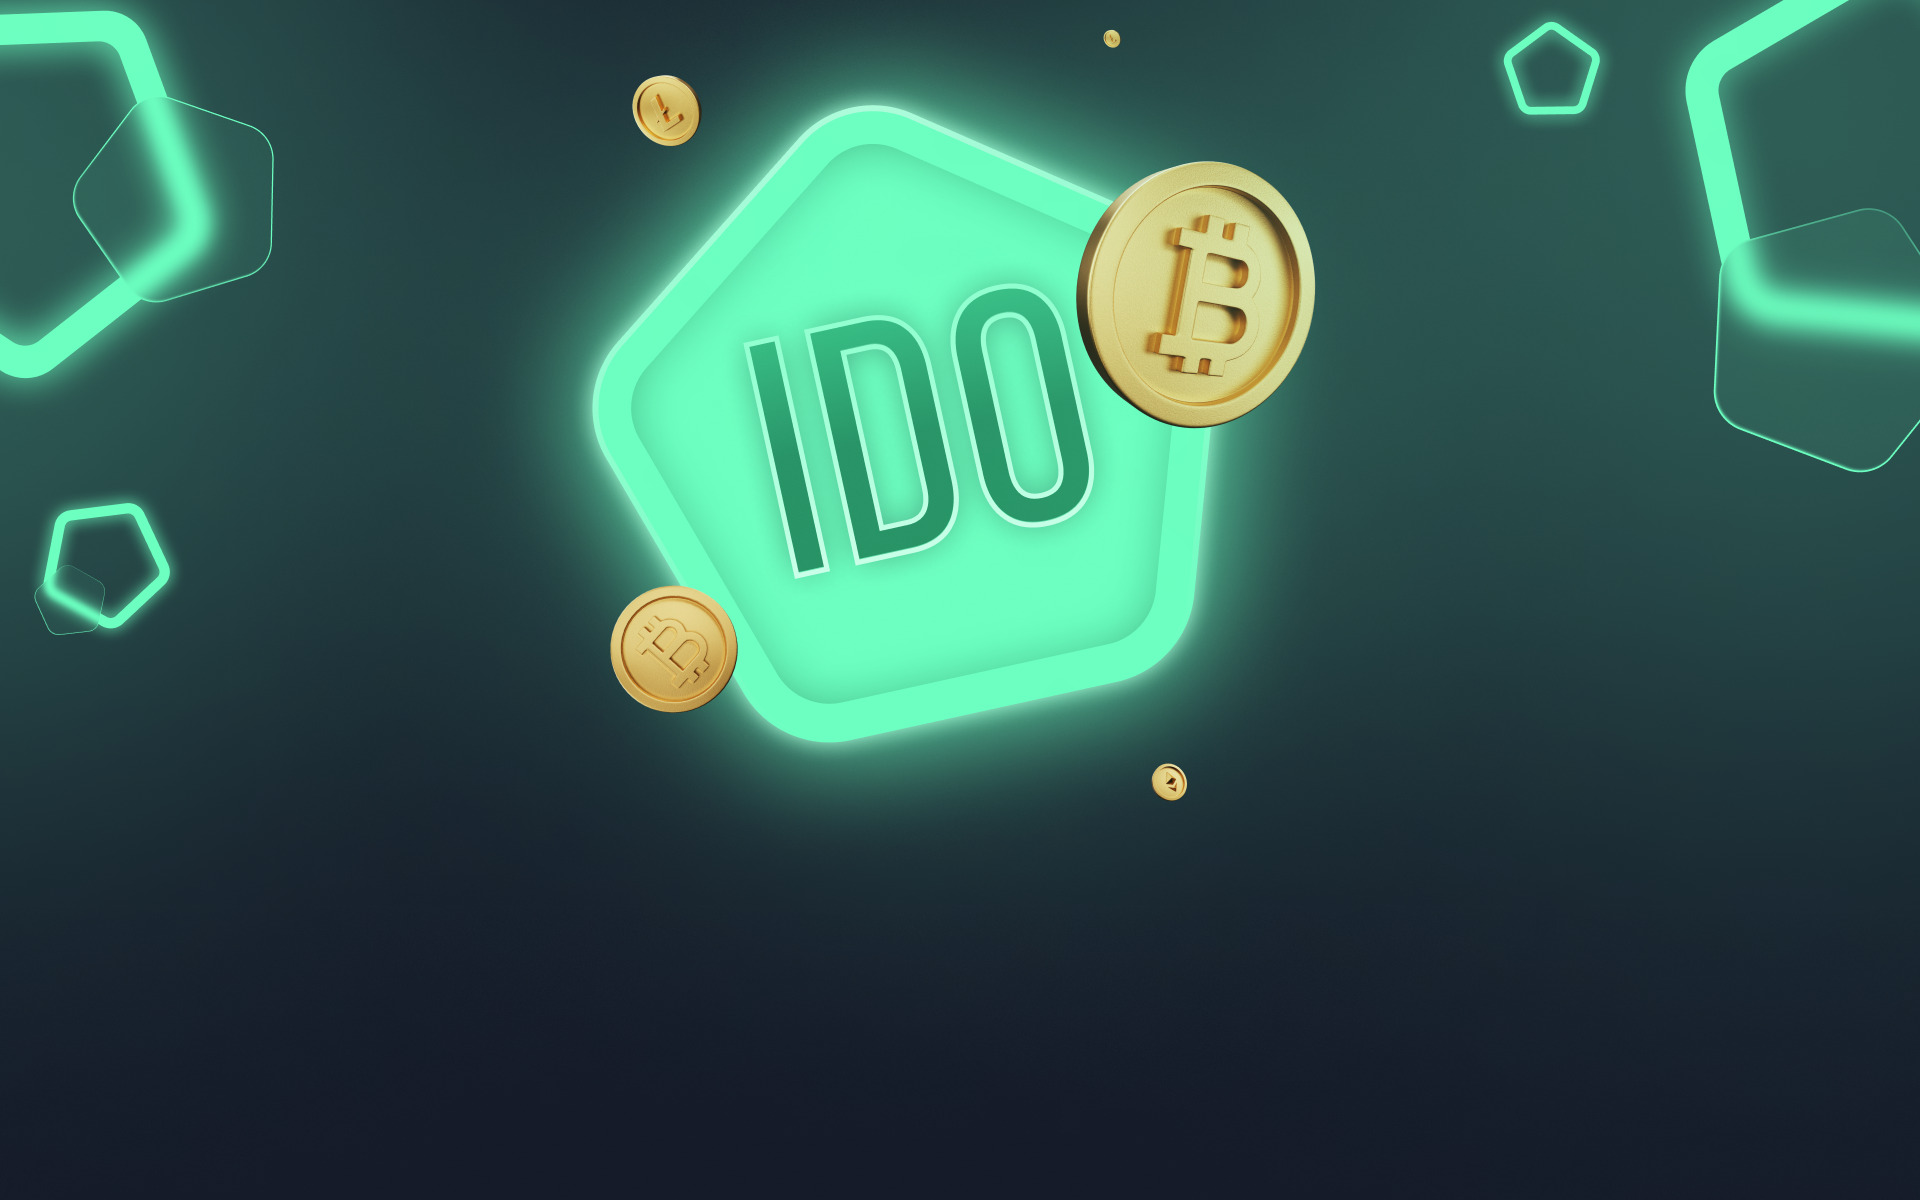 ido crypto currency